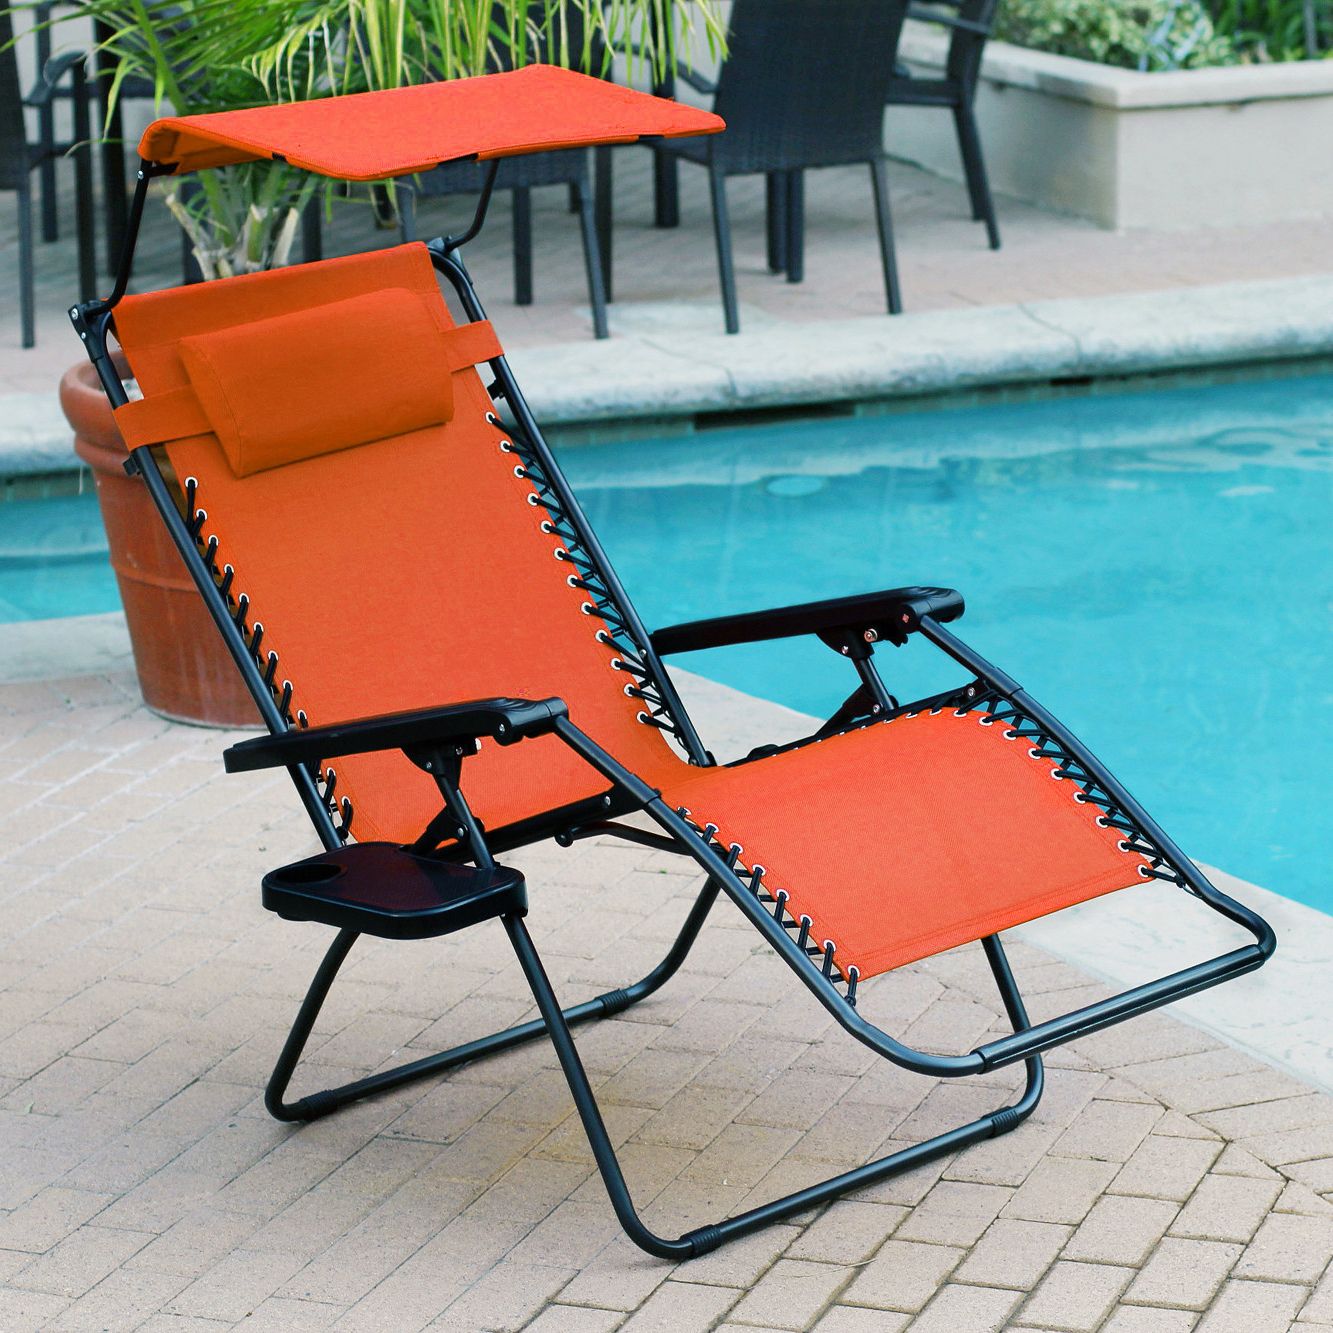 Popular The 4 Best Zero Gravity Chairs On The Market Reviews & Guide In Oversize Wider Armrest Padded Lounge Chairs (View 10 of 25)